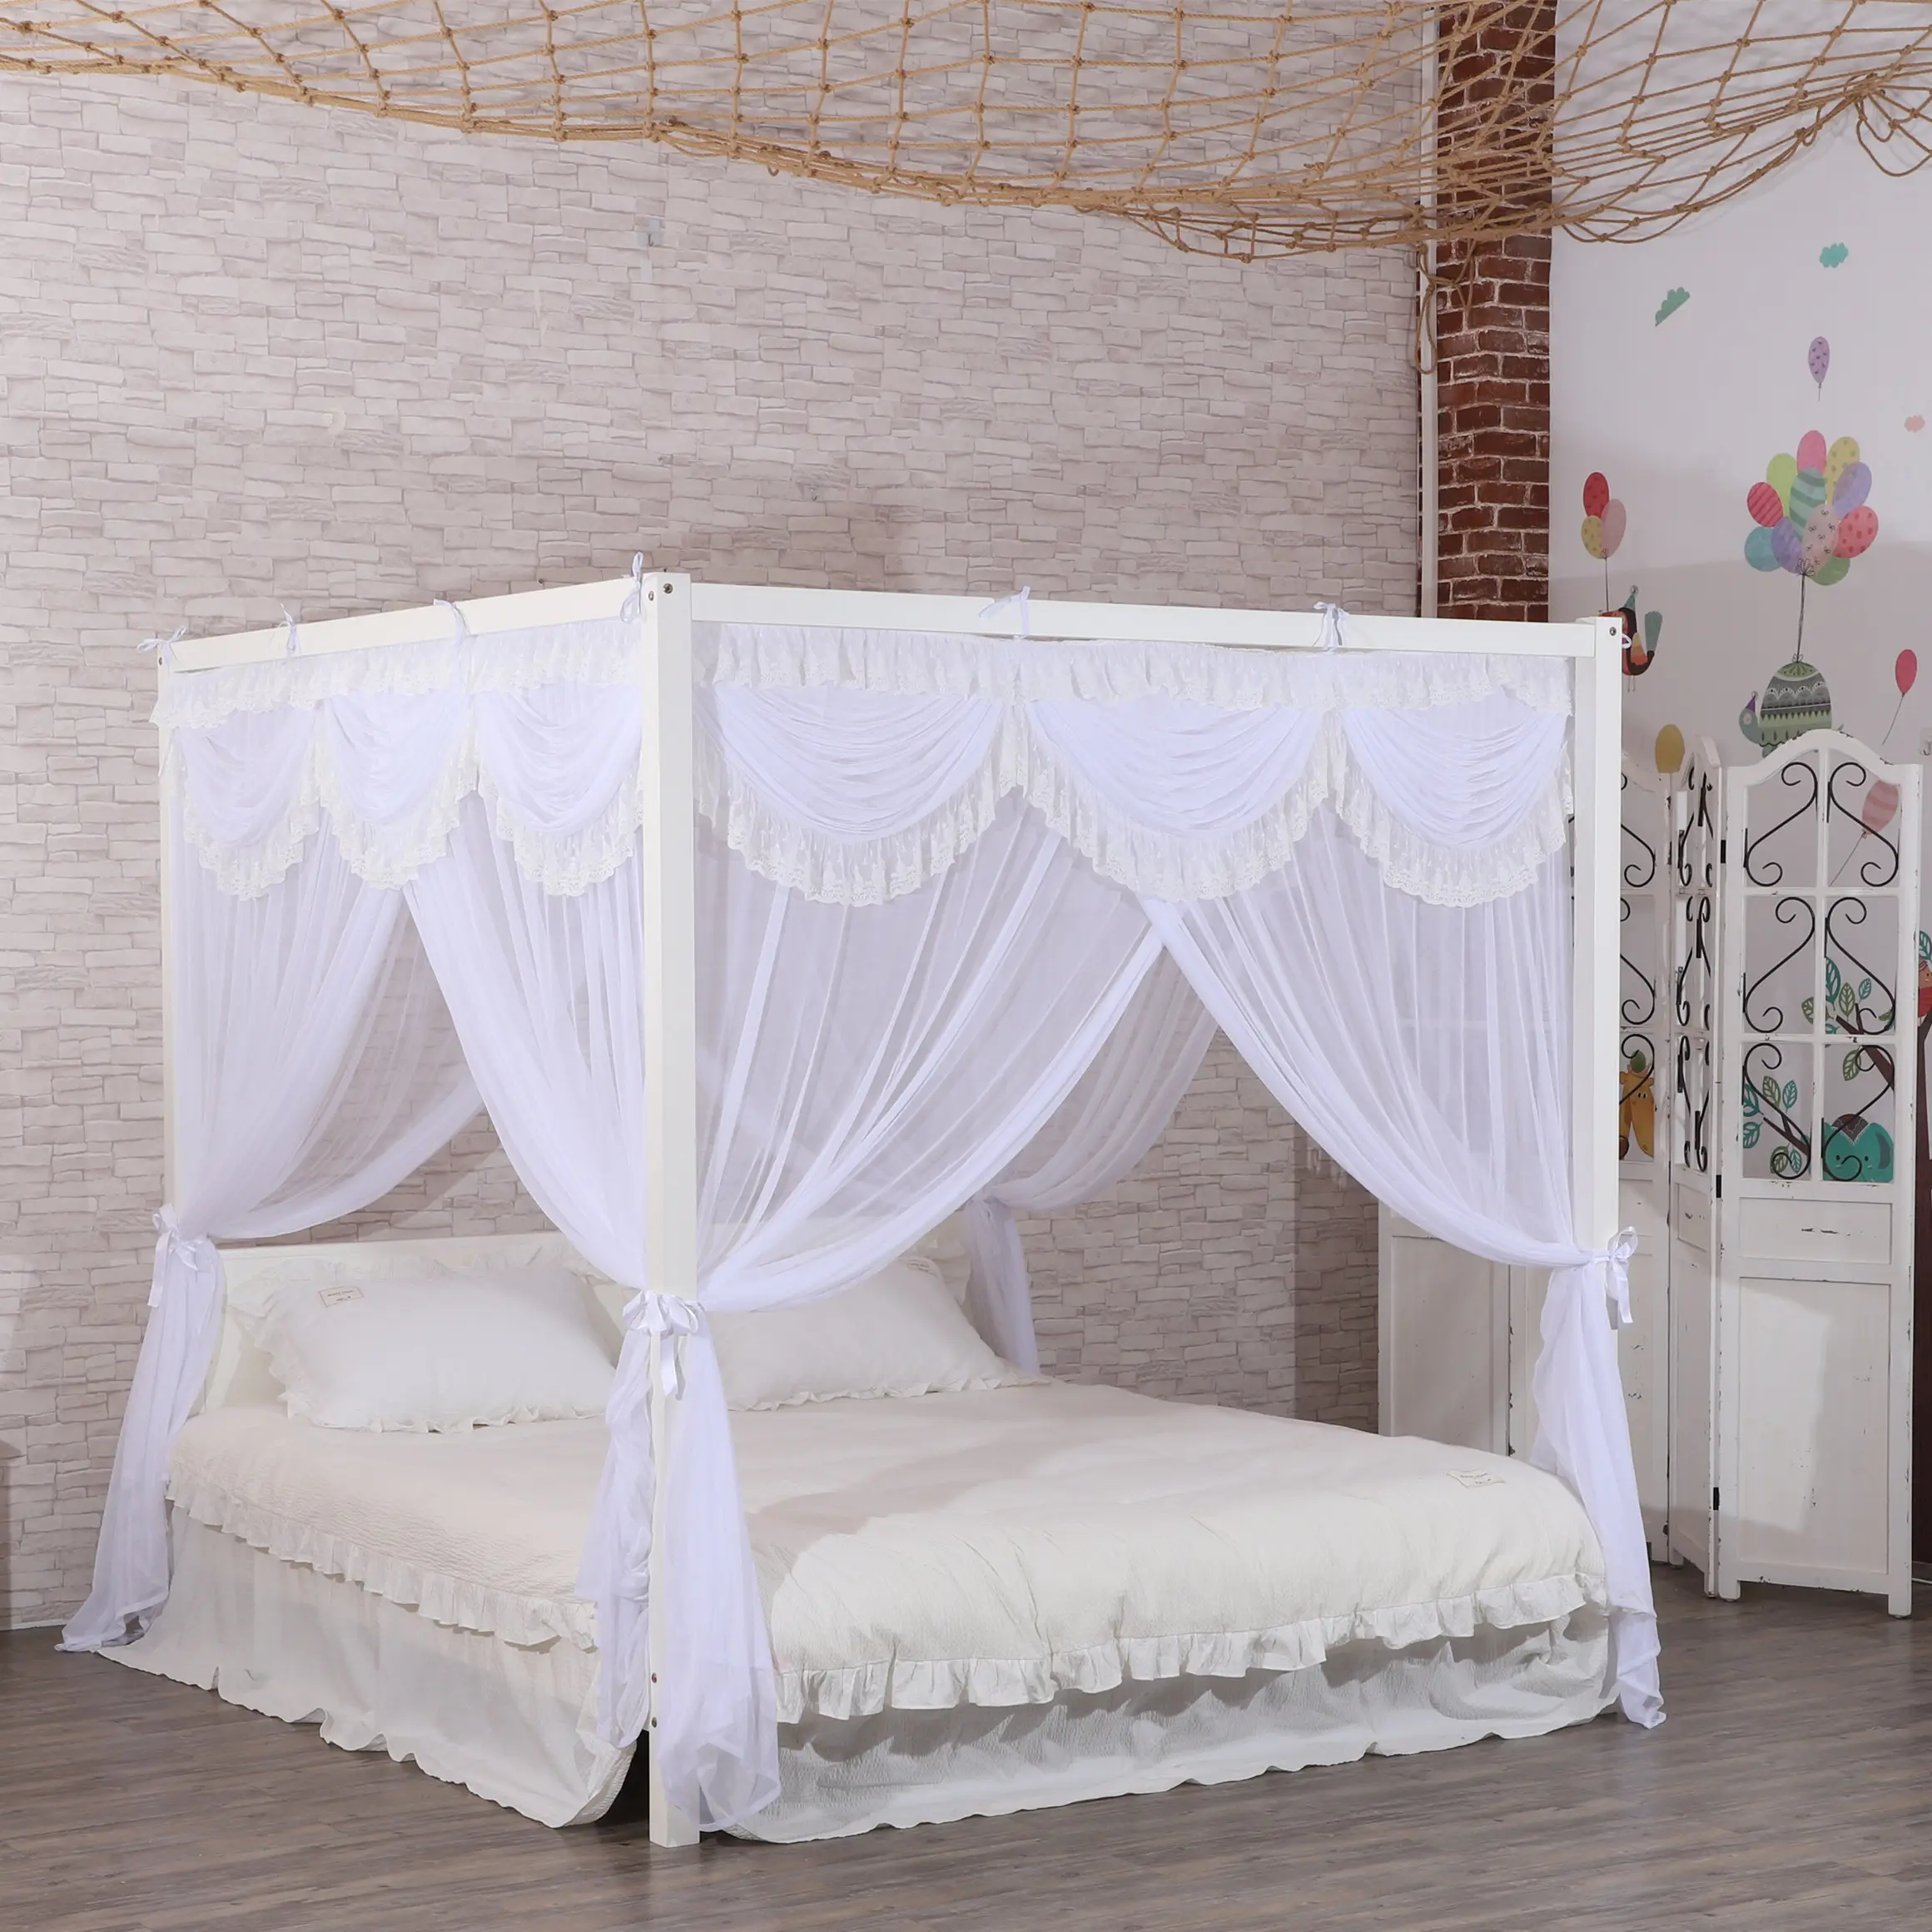 Quality Mosquito Net New Design Princess Style Beautiful Lace Canopy Mesh Indoor Home Decoration Net King Queen Size Bed Square Shape Mosquito Net